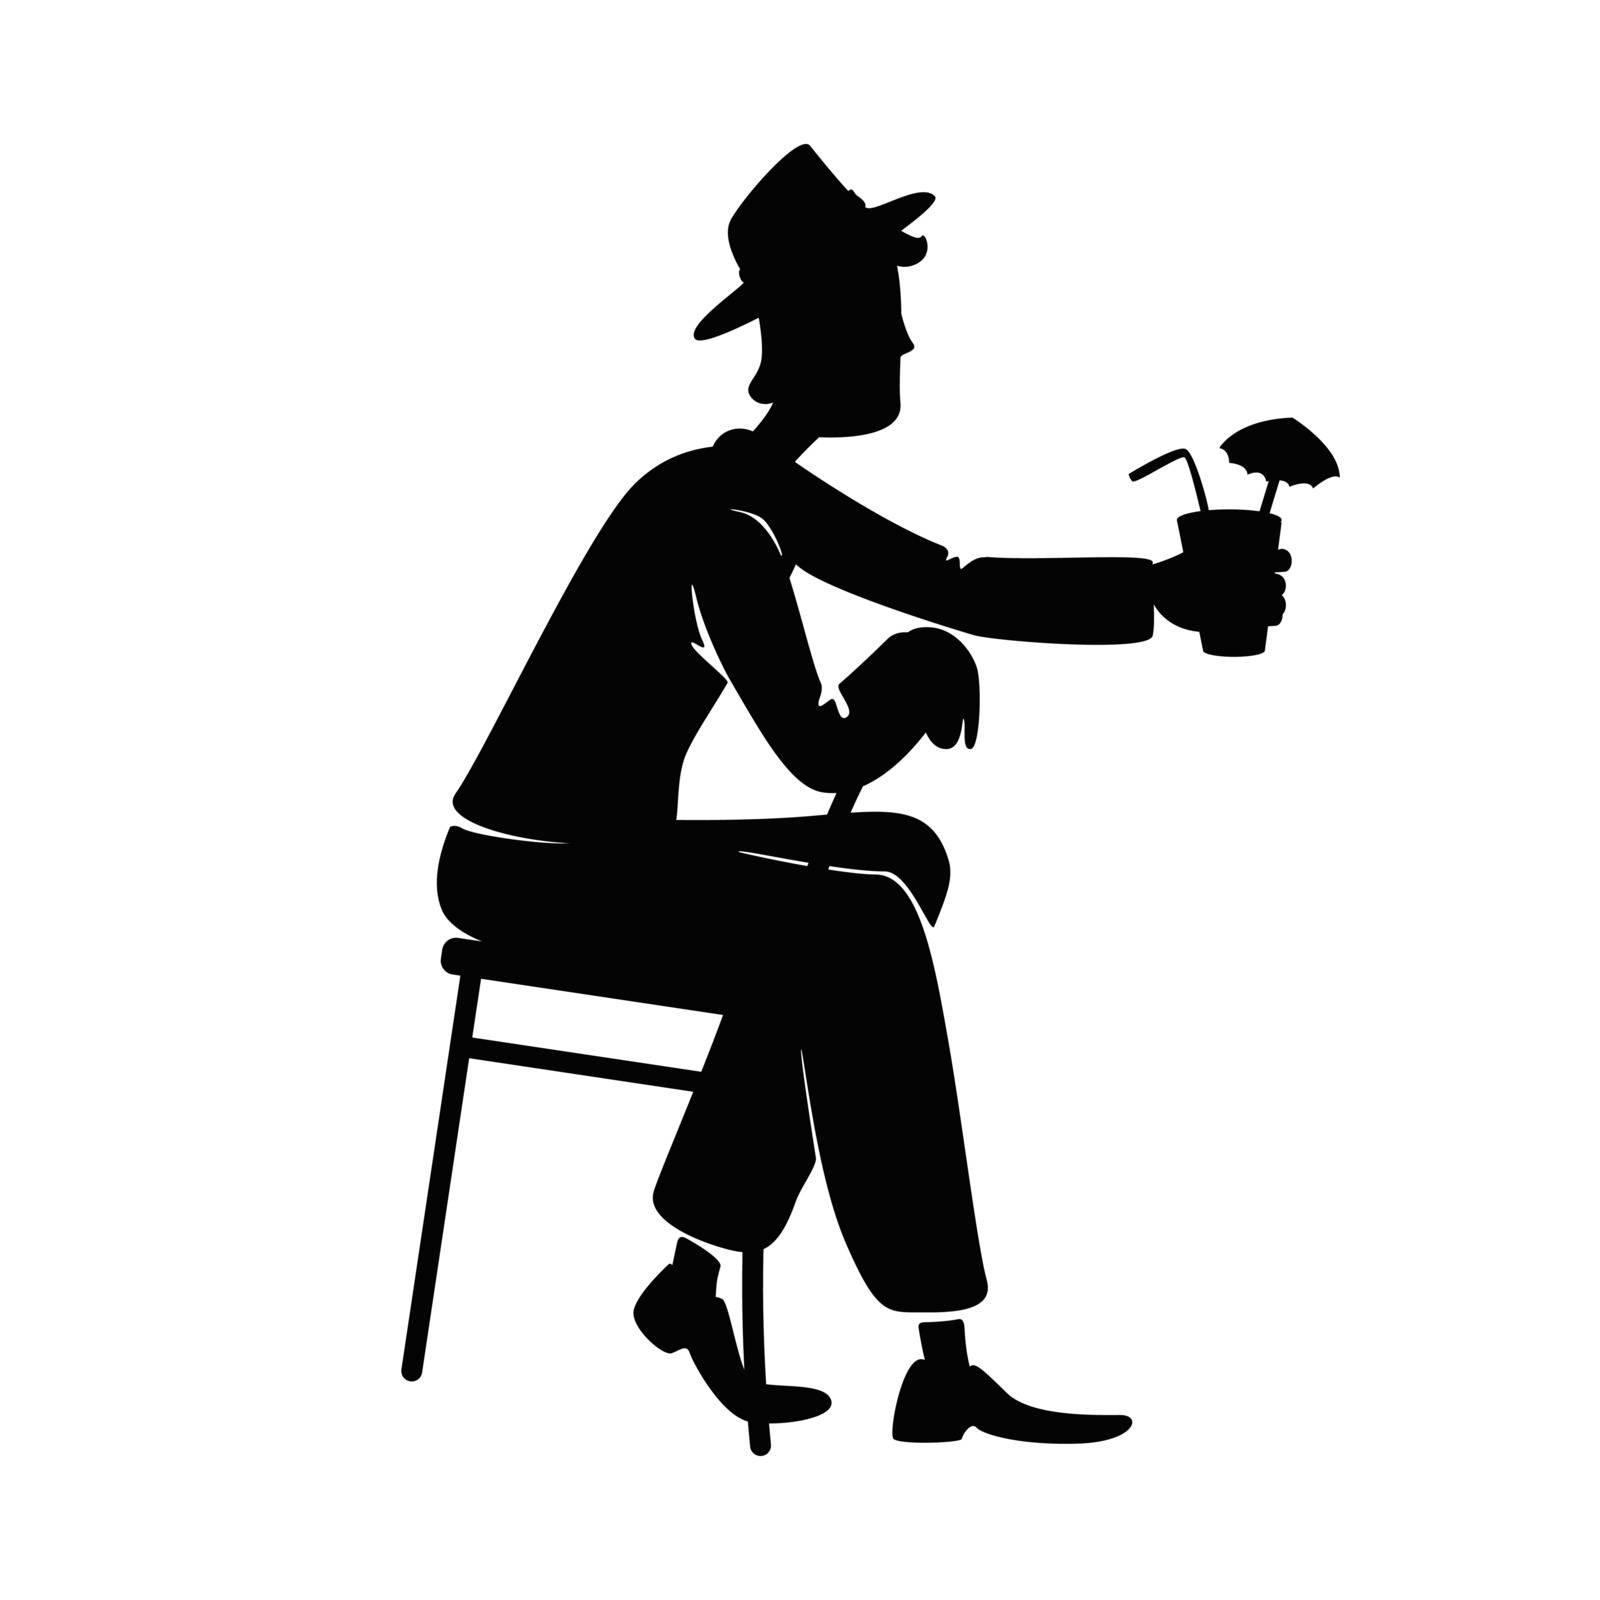 Man drinking alcohol black silhouette vector illustration. Sitting on chair person pose. Old fashioned gentleman in hat with cocktail 2d cartoon character shape for commercial, animation, printing by ntl